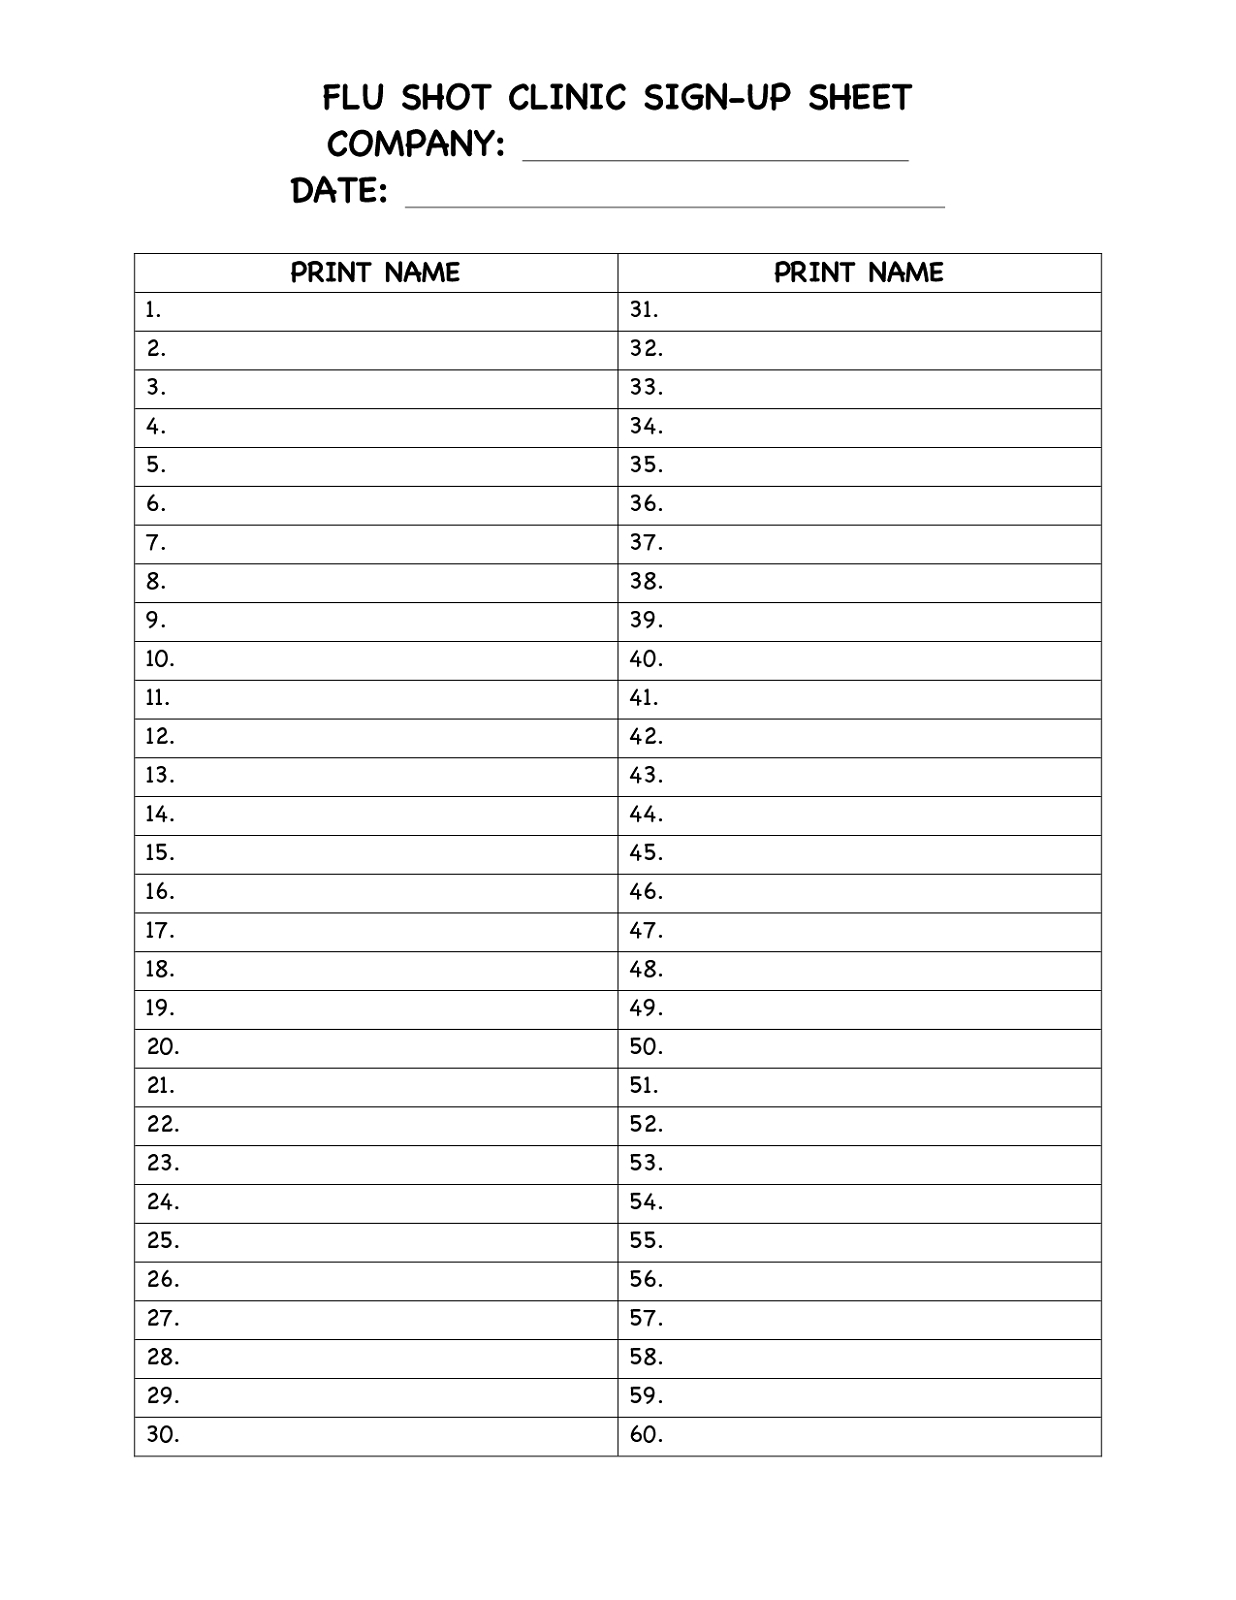 Potluck Sign Up Sheet Word For Events | Loving Printable Inside Potluck Signup Sheet Template Word